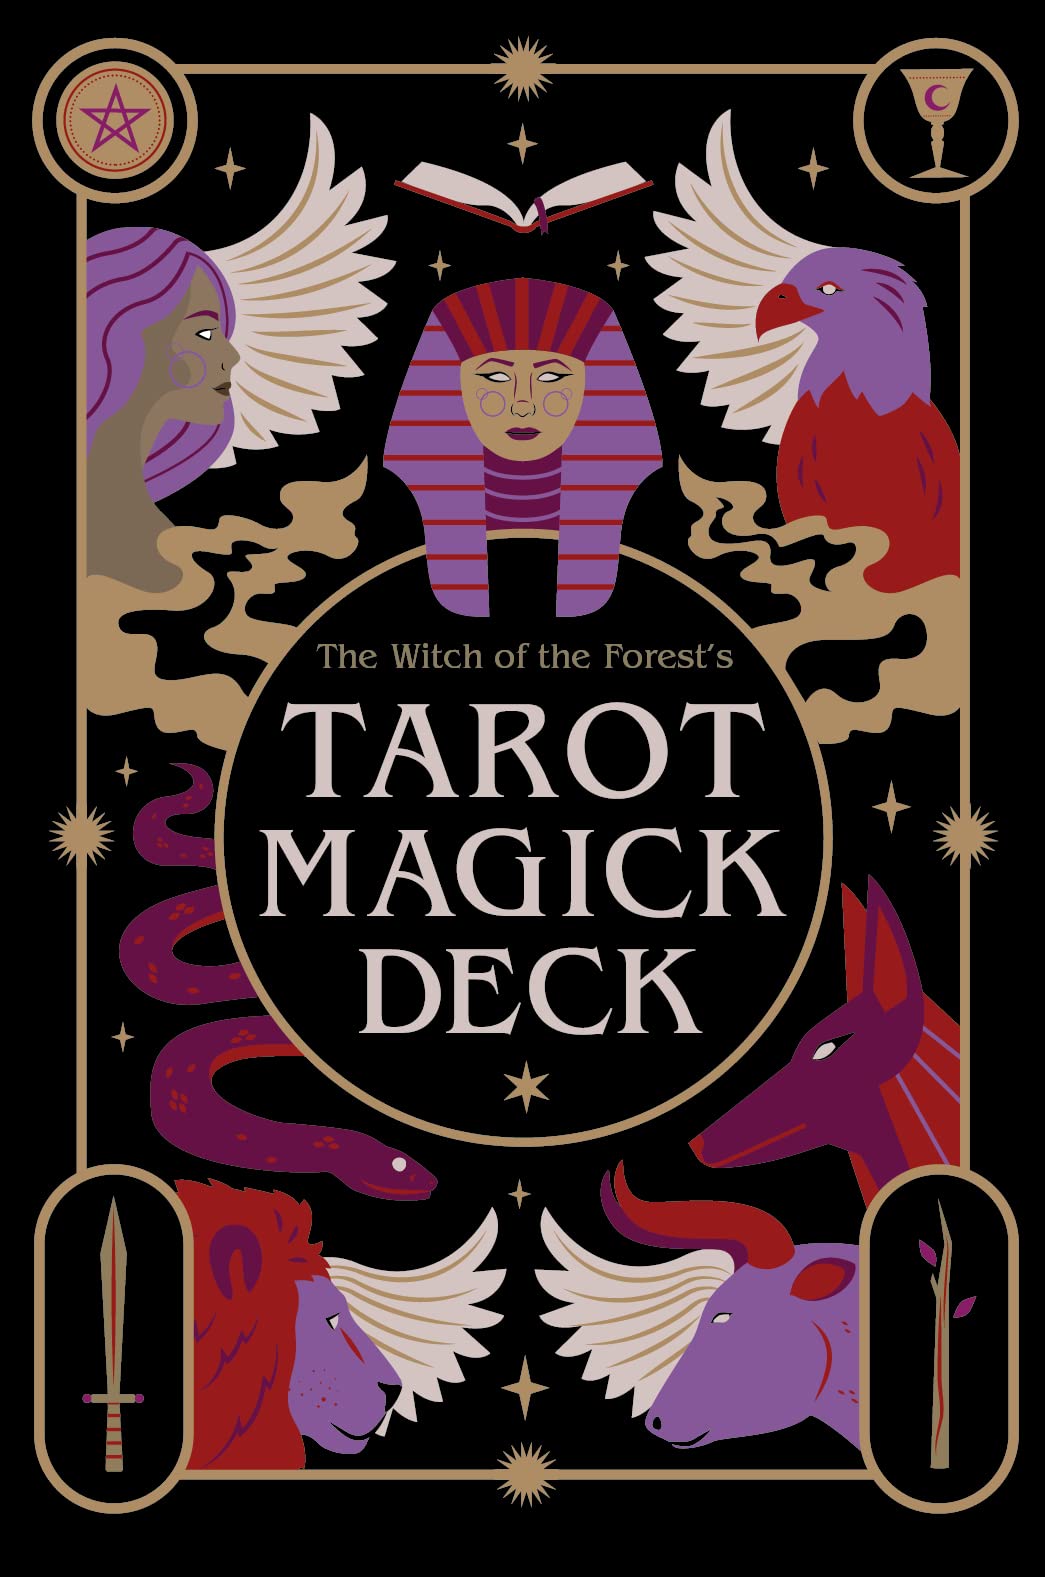 WITCH OF THE FOREST'S TAROT MAGICK DECK